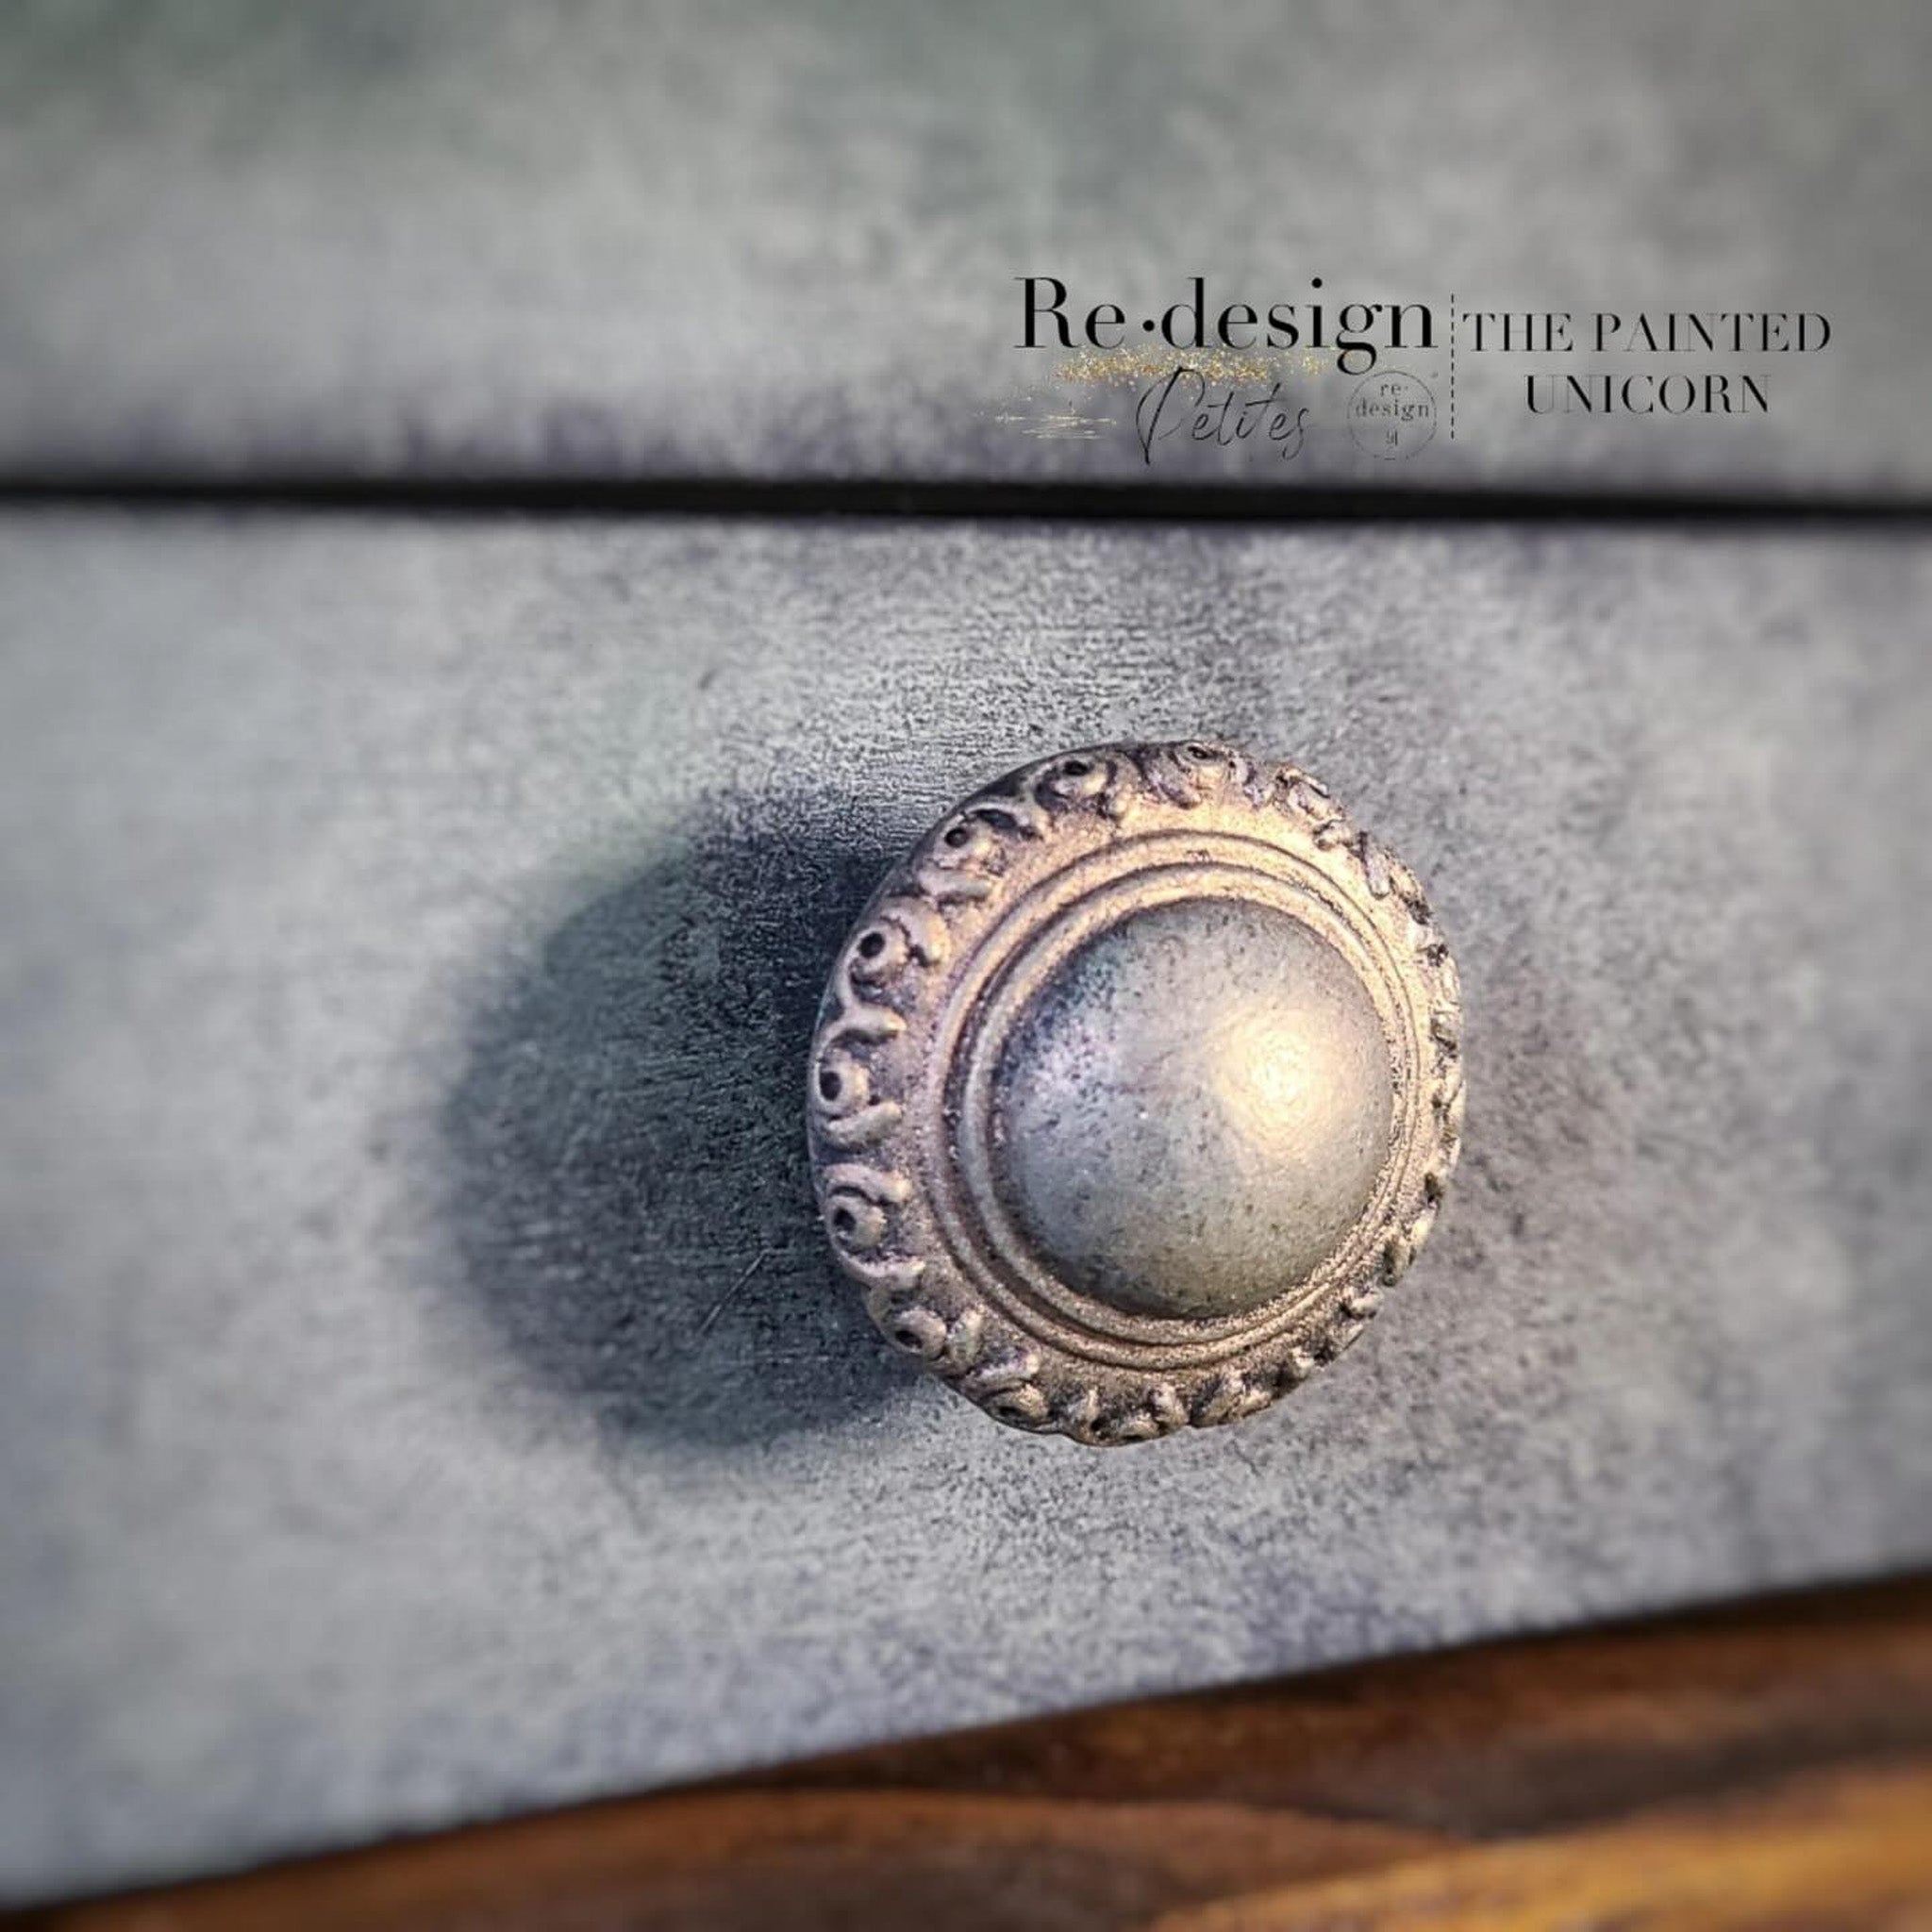 A close-up view of a round drawer knob with an ornate edging design created by The Painted Unicorn using Redesign with Prima's Luxe Ornate 3D Knob silicone mold.